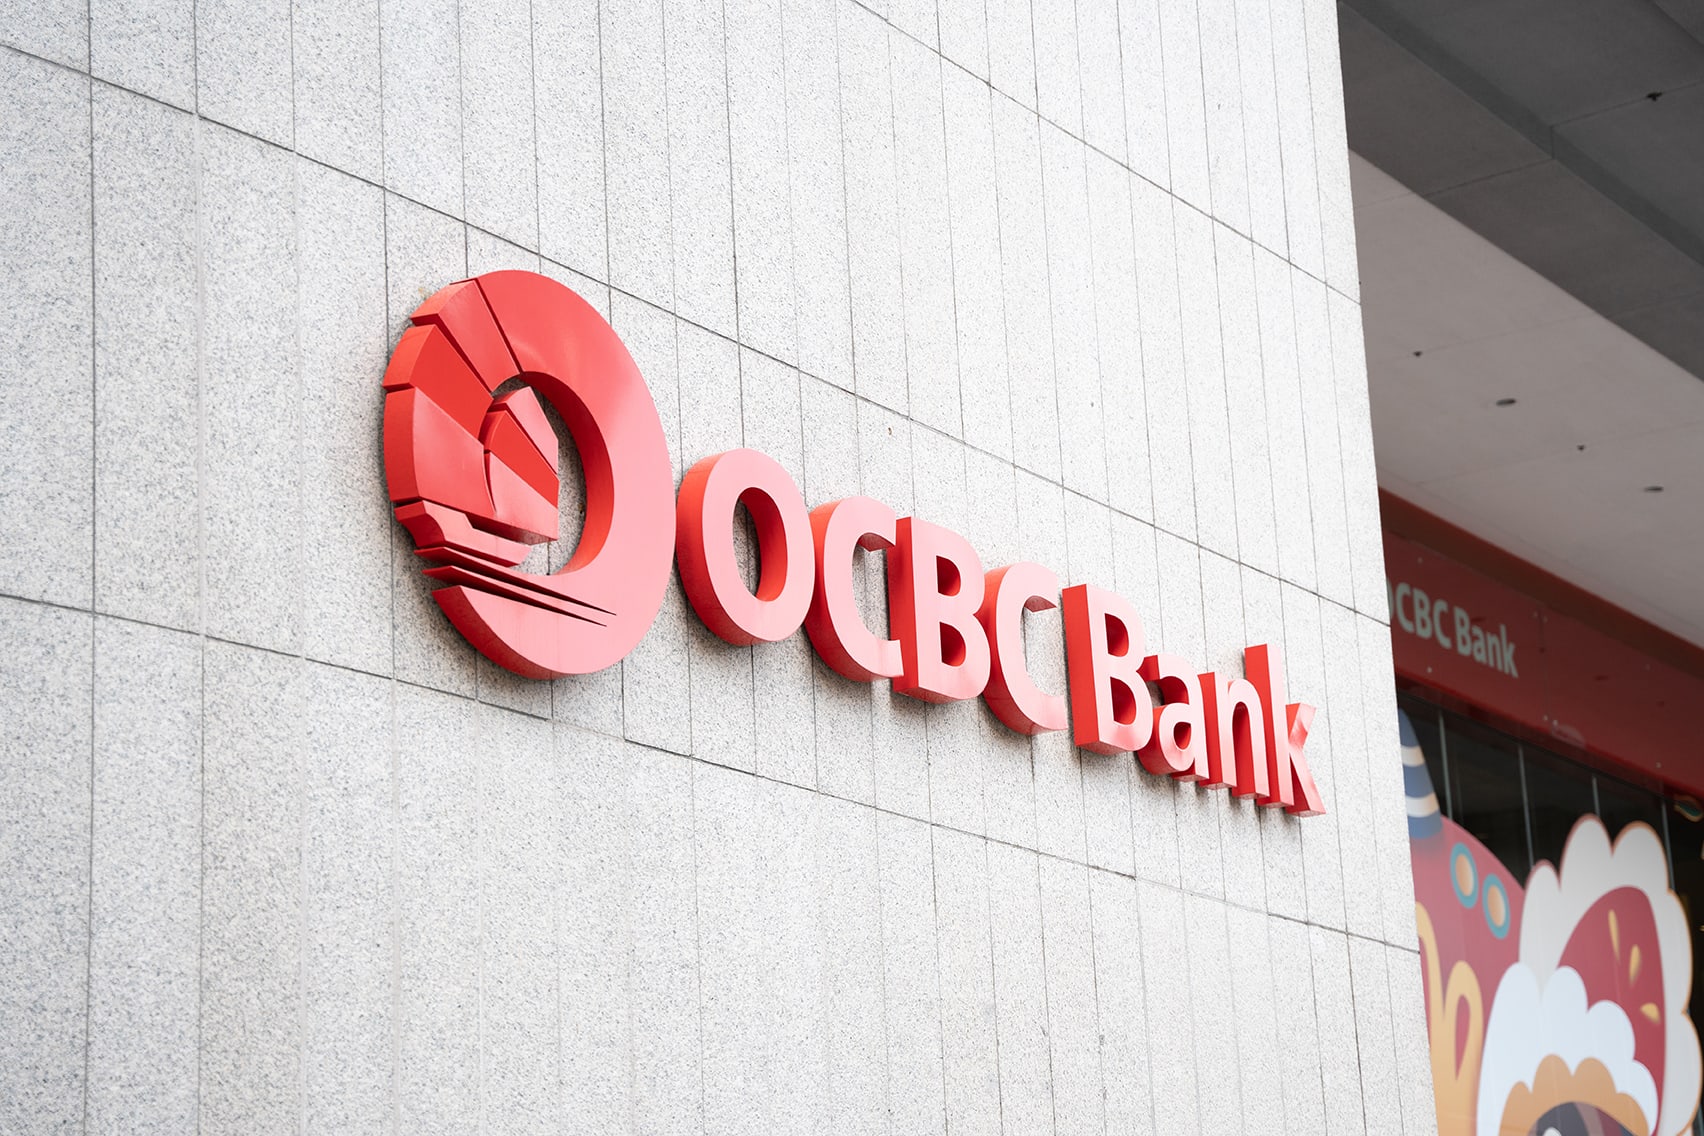 OCBC completes arrangements to fully reimburse all phishing scam victims, who total 790 with combined losses of S$13.7m